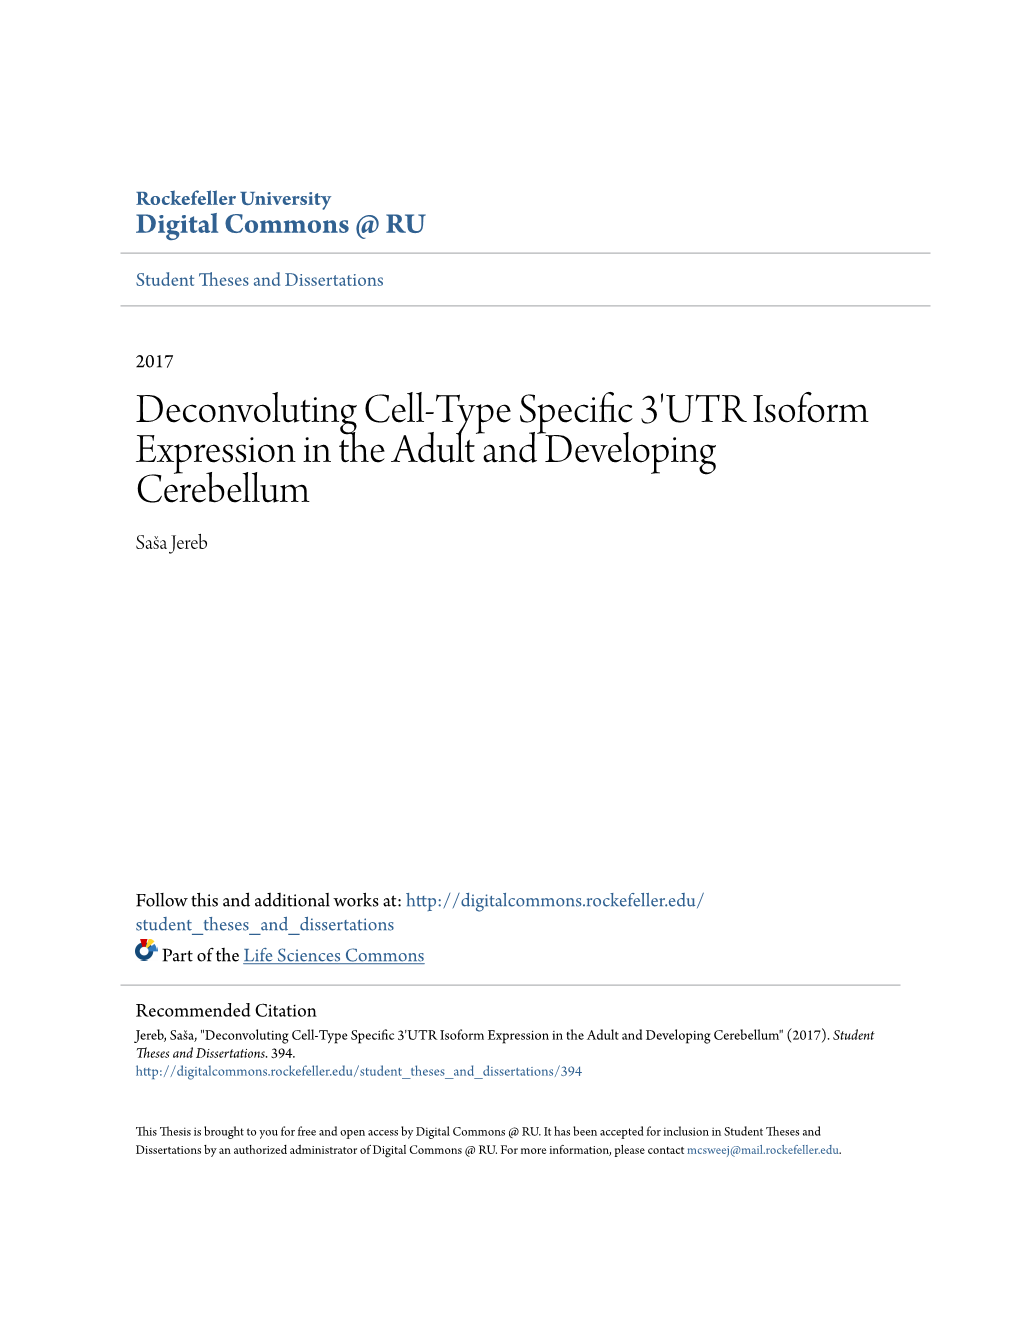 Deconvoluting Cell-Type Specific 3'UTR Isoform Expression in the Adult and Developing Cerebellum Saša Jereb